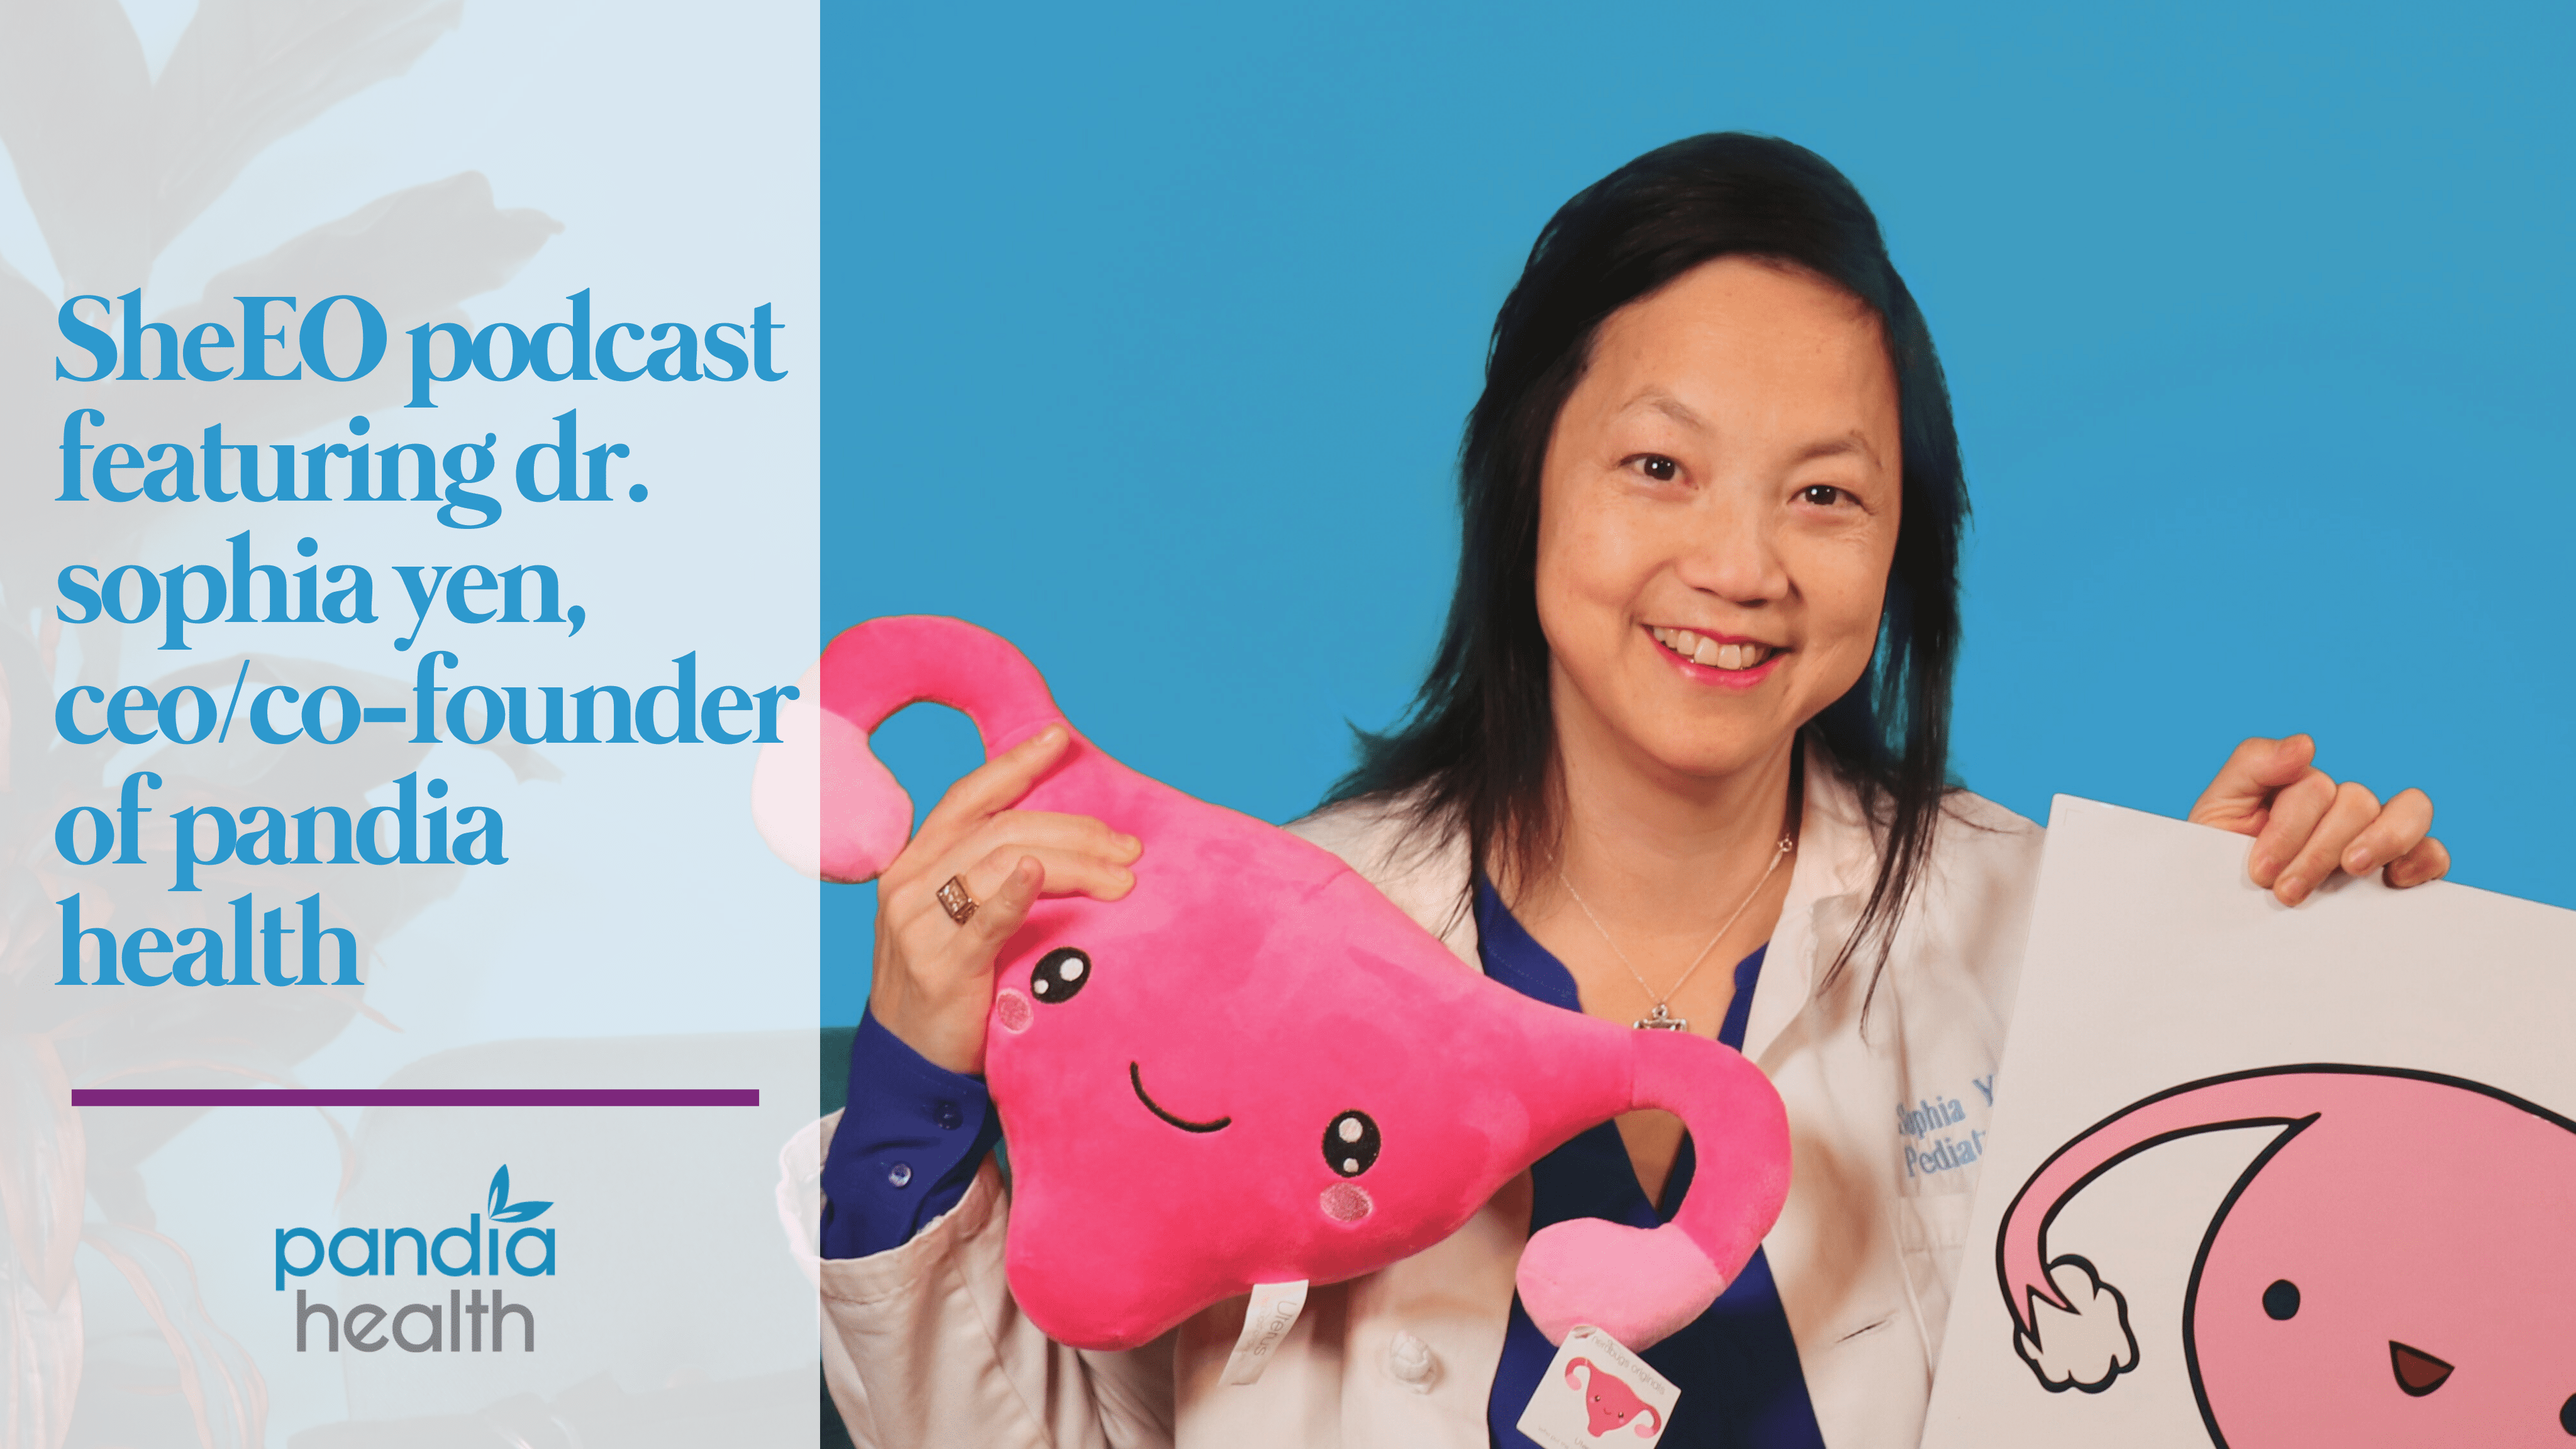 Dr. Sophia Yen smiling holding a pink uterus stuffed animal in one hand and a white shirt with a uterus on it in the other hand